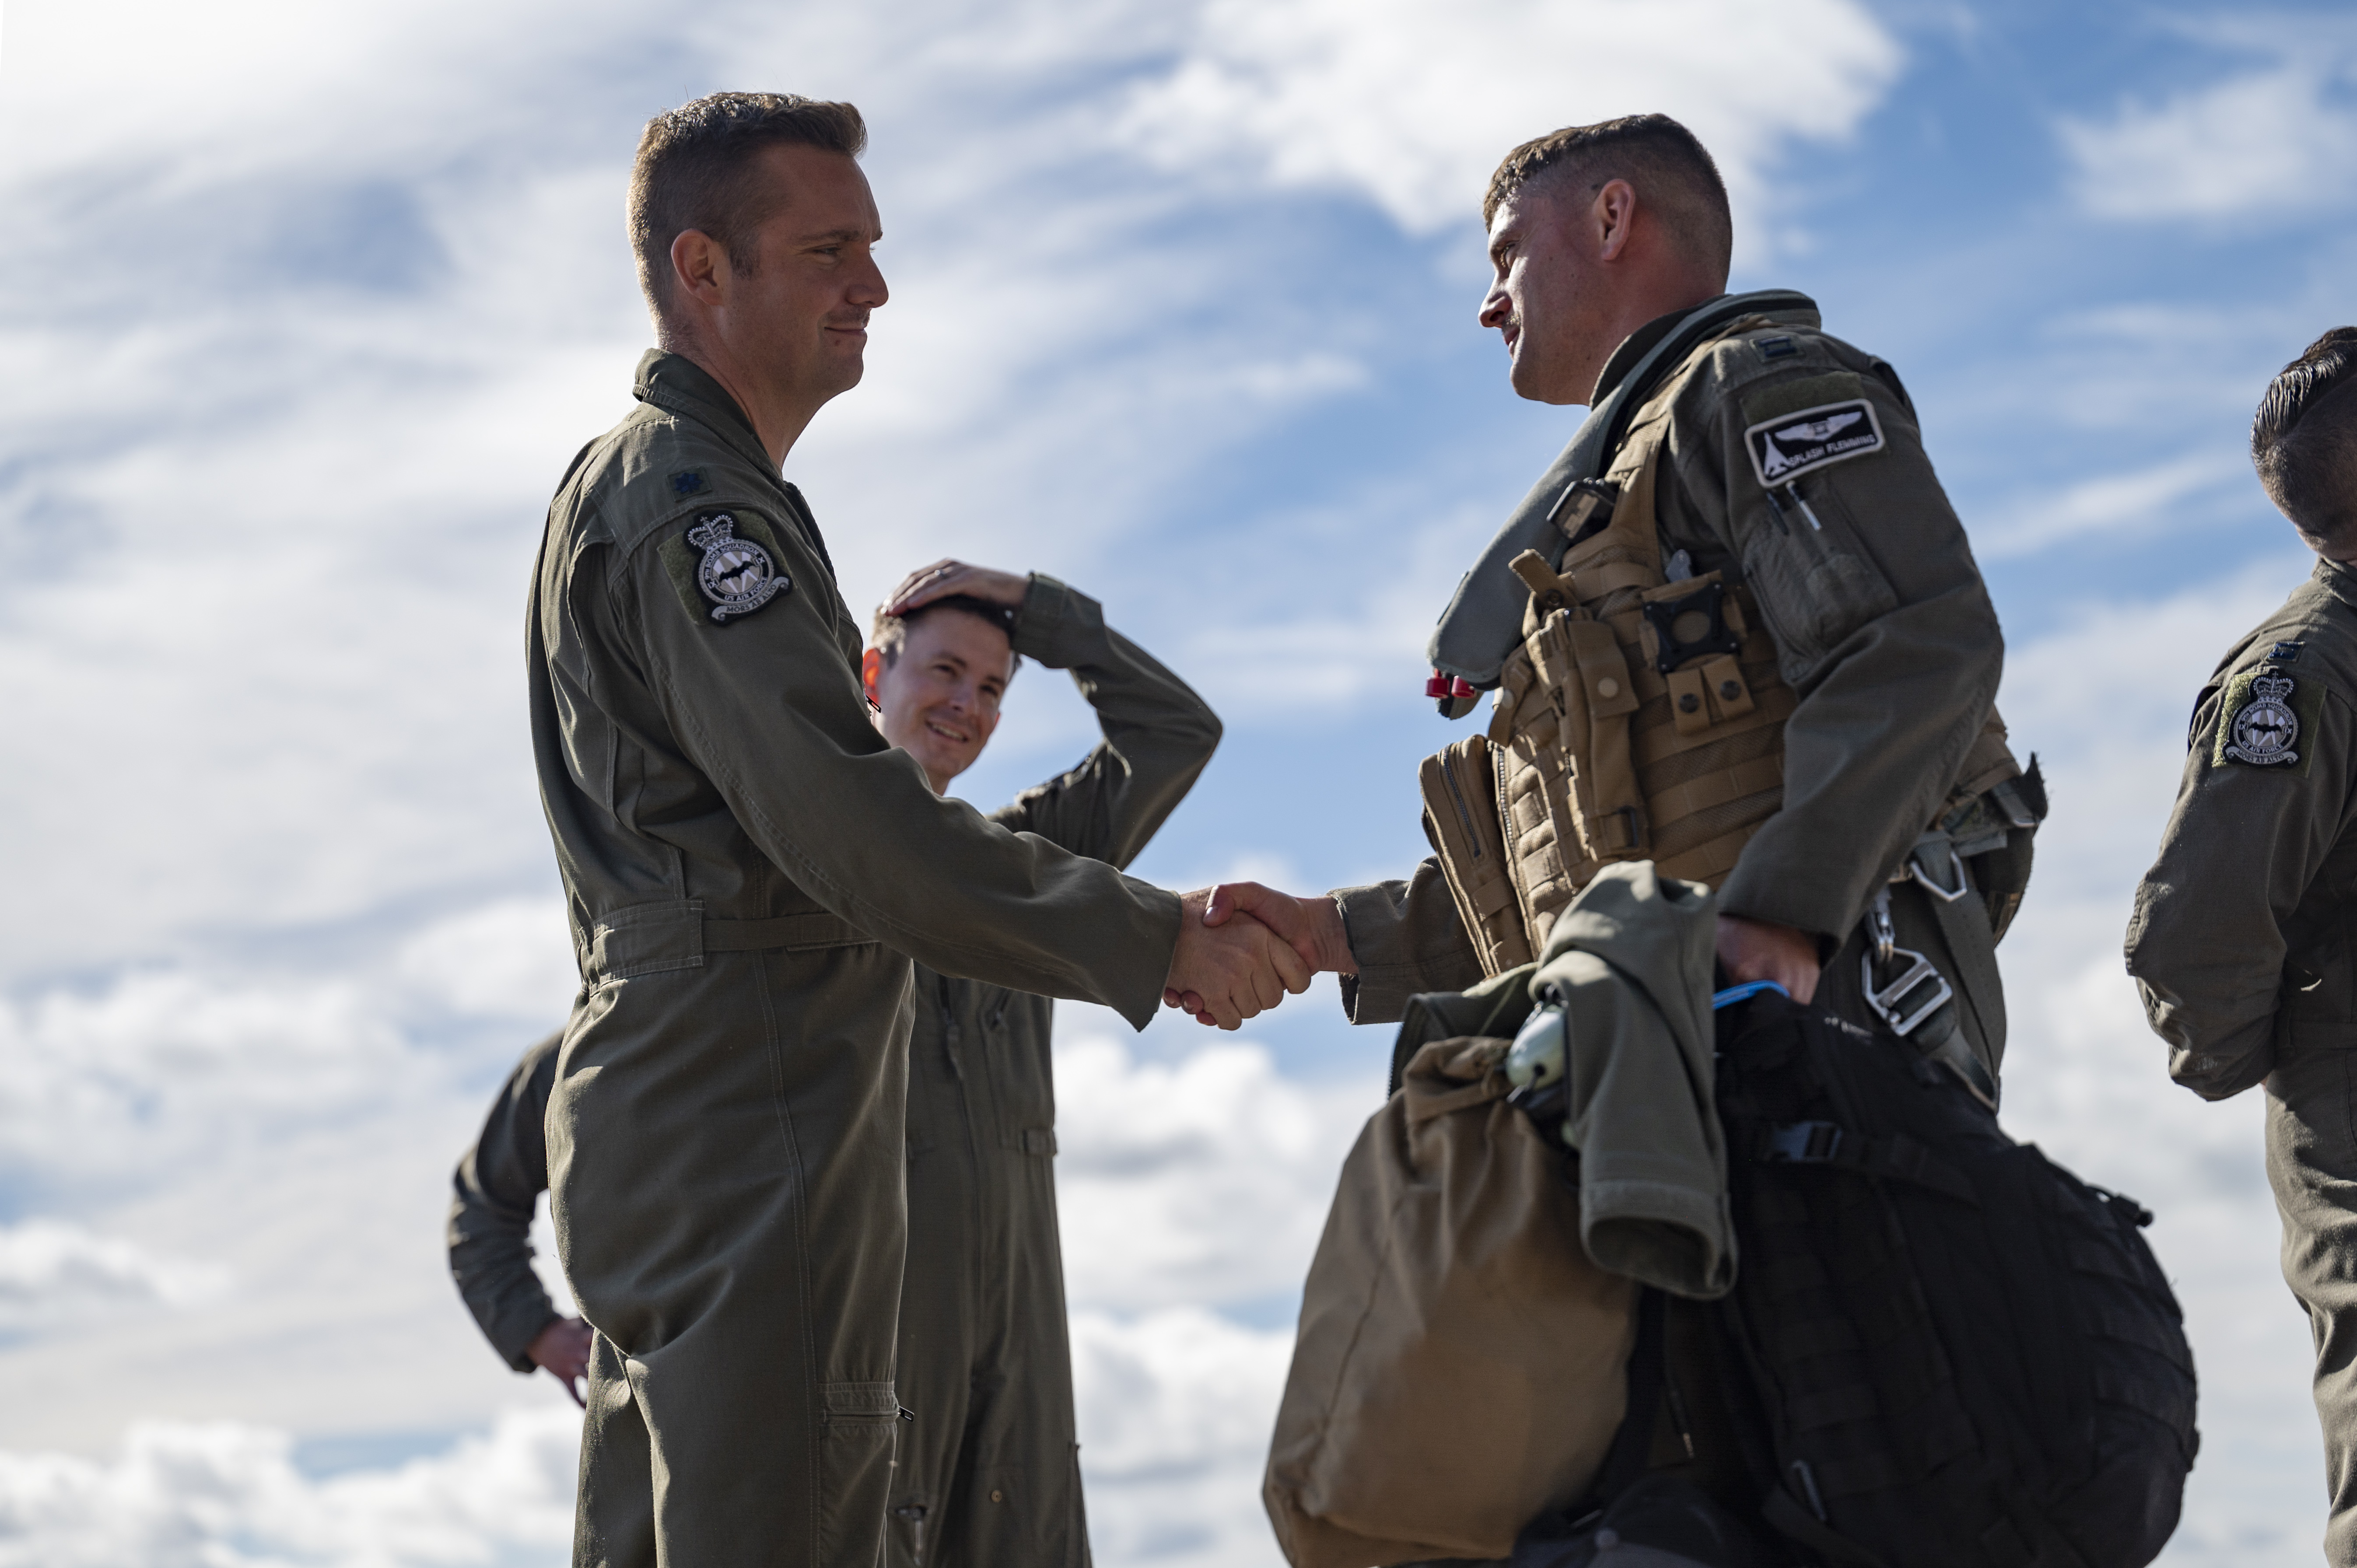 Pilots shake hands as other personnel stand by.